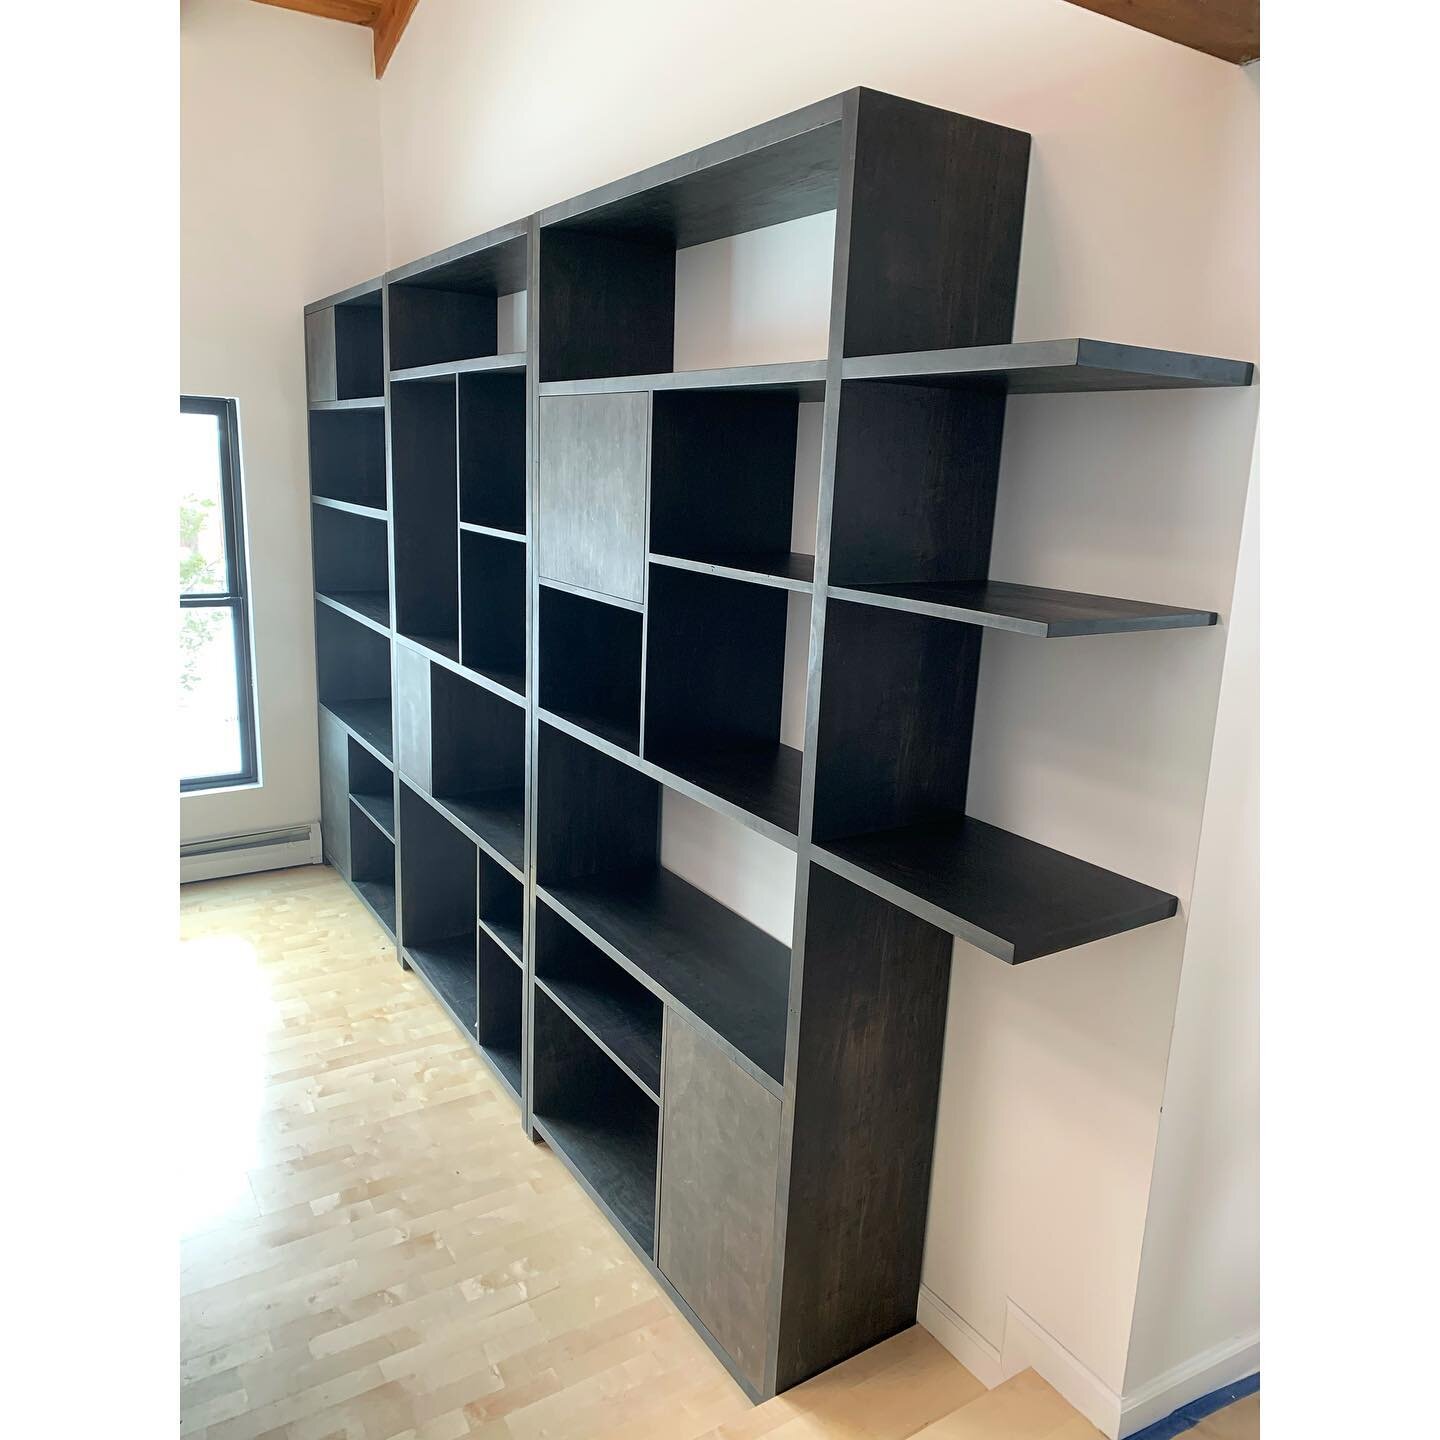 Custom shelving unit (12ft x 8ft) installed in its new home in Santa Fe. Made of ambrosia maple with an oxidized + charcoal finish.  Beautiful Ambrosia Maple from @alpinebuilderssupplyco 
.
.
.
.

#tetradesignworks #woodworking #modern #bookshelves  